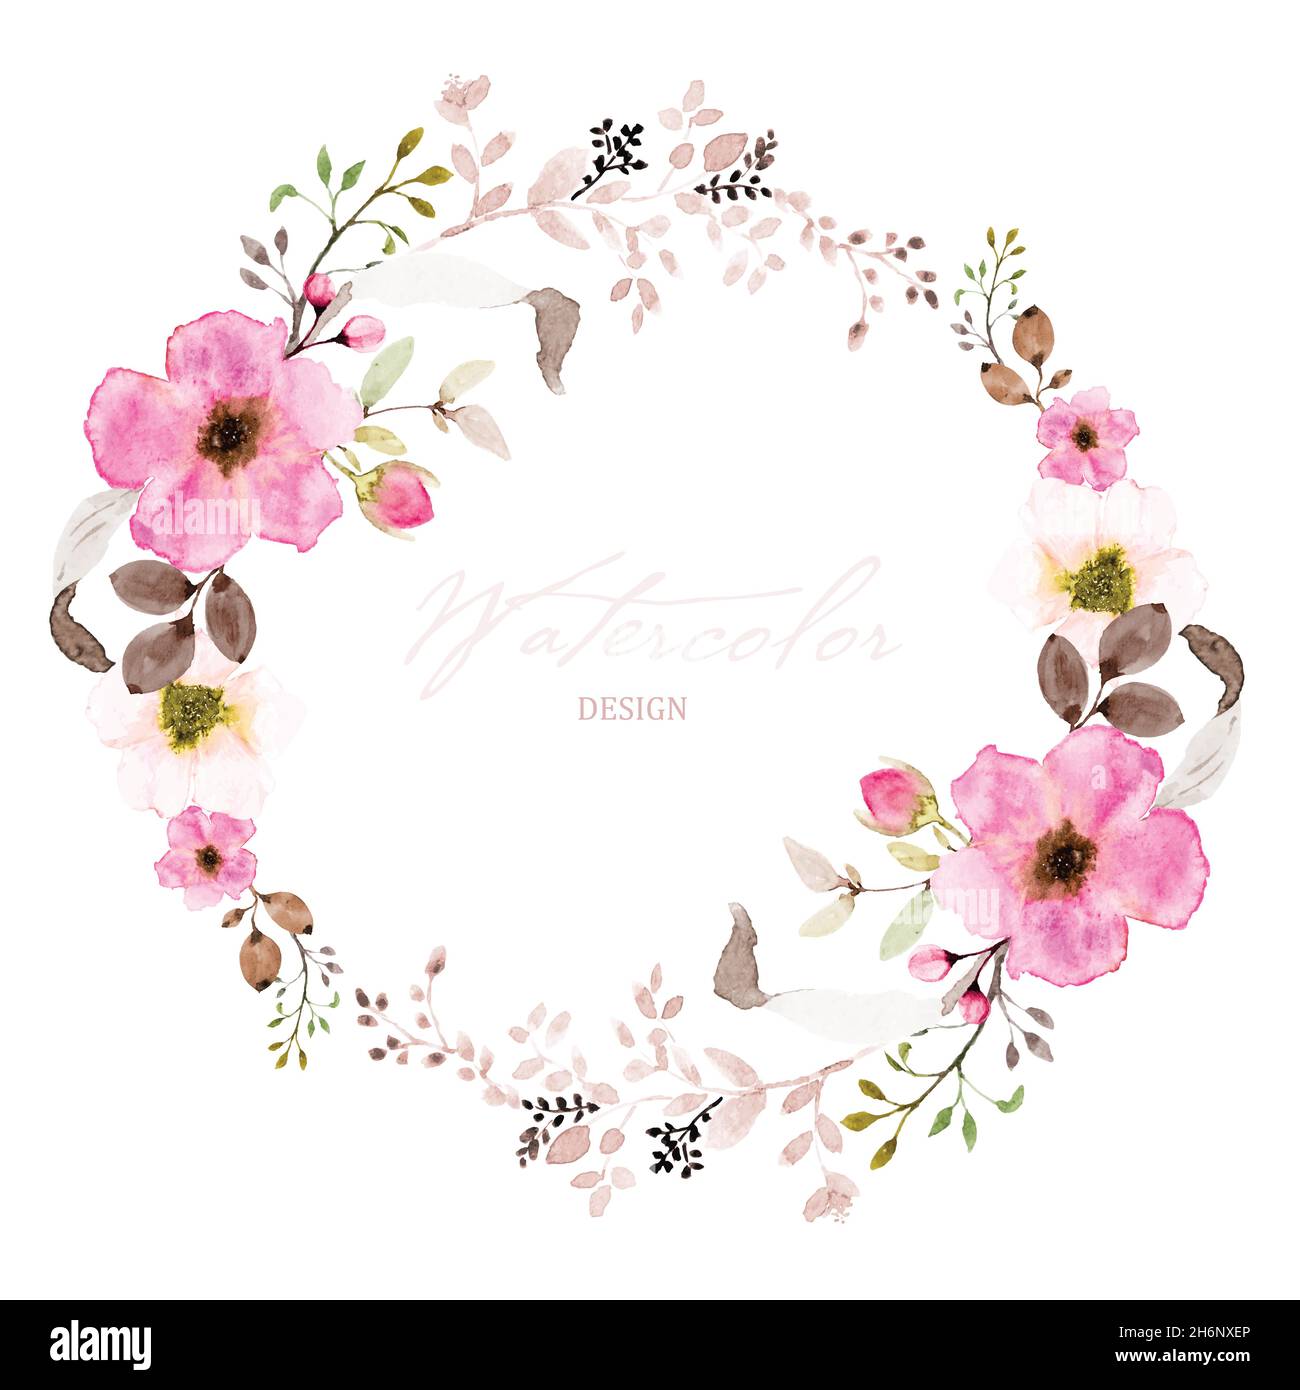 Watercolor wreath design with pink flowers and leaves. Watercolor hand-painted with floral bouquet isolated on white background. Suitable for wedding Stock Vector